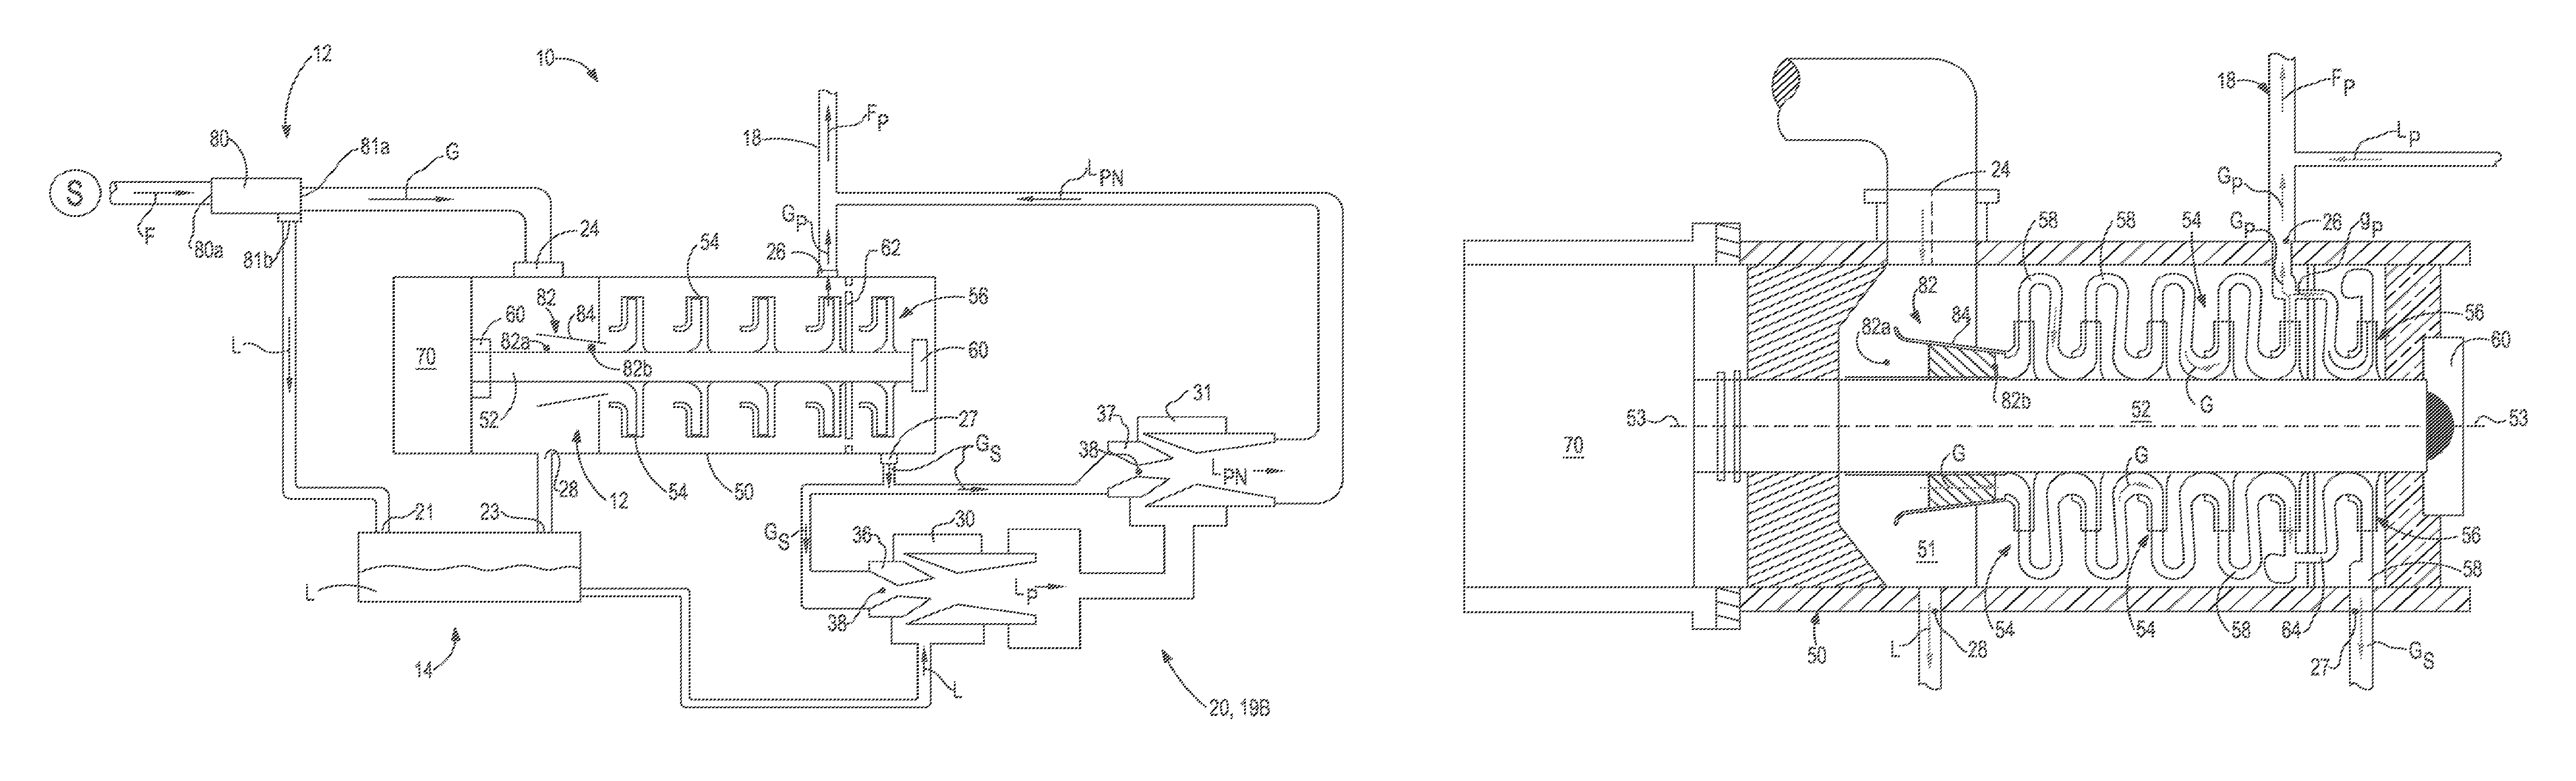 Compressor assembly including separator and ejector pump